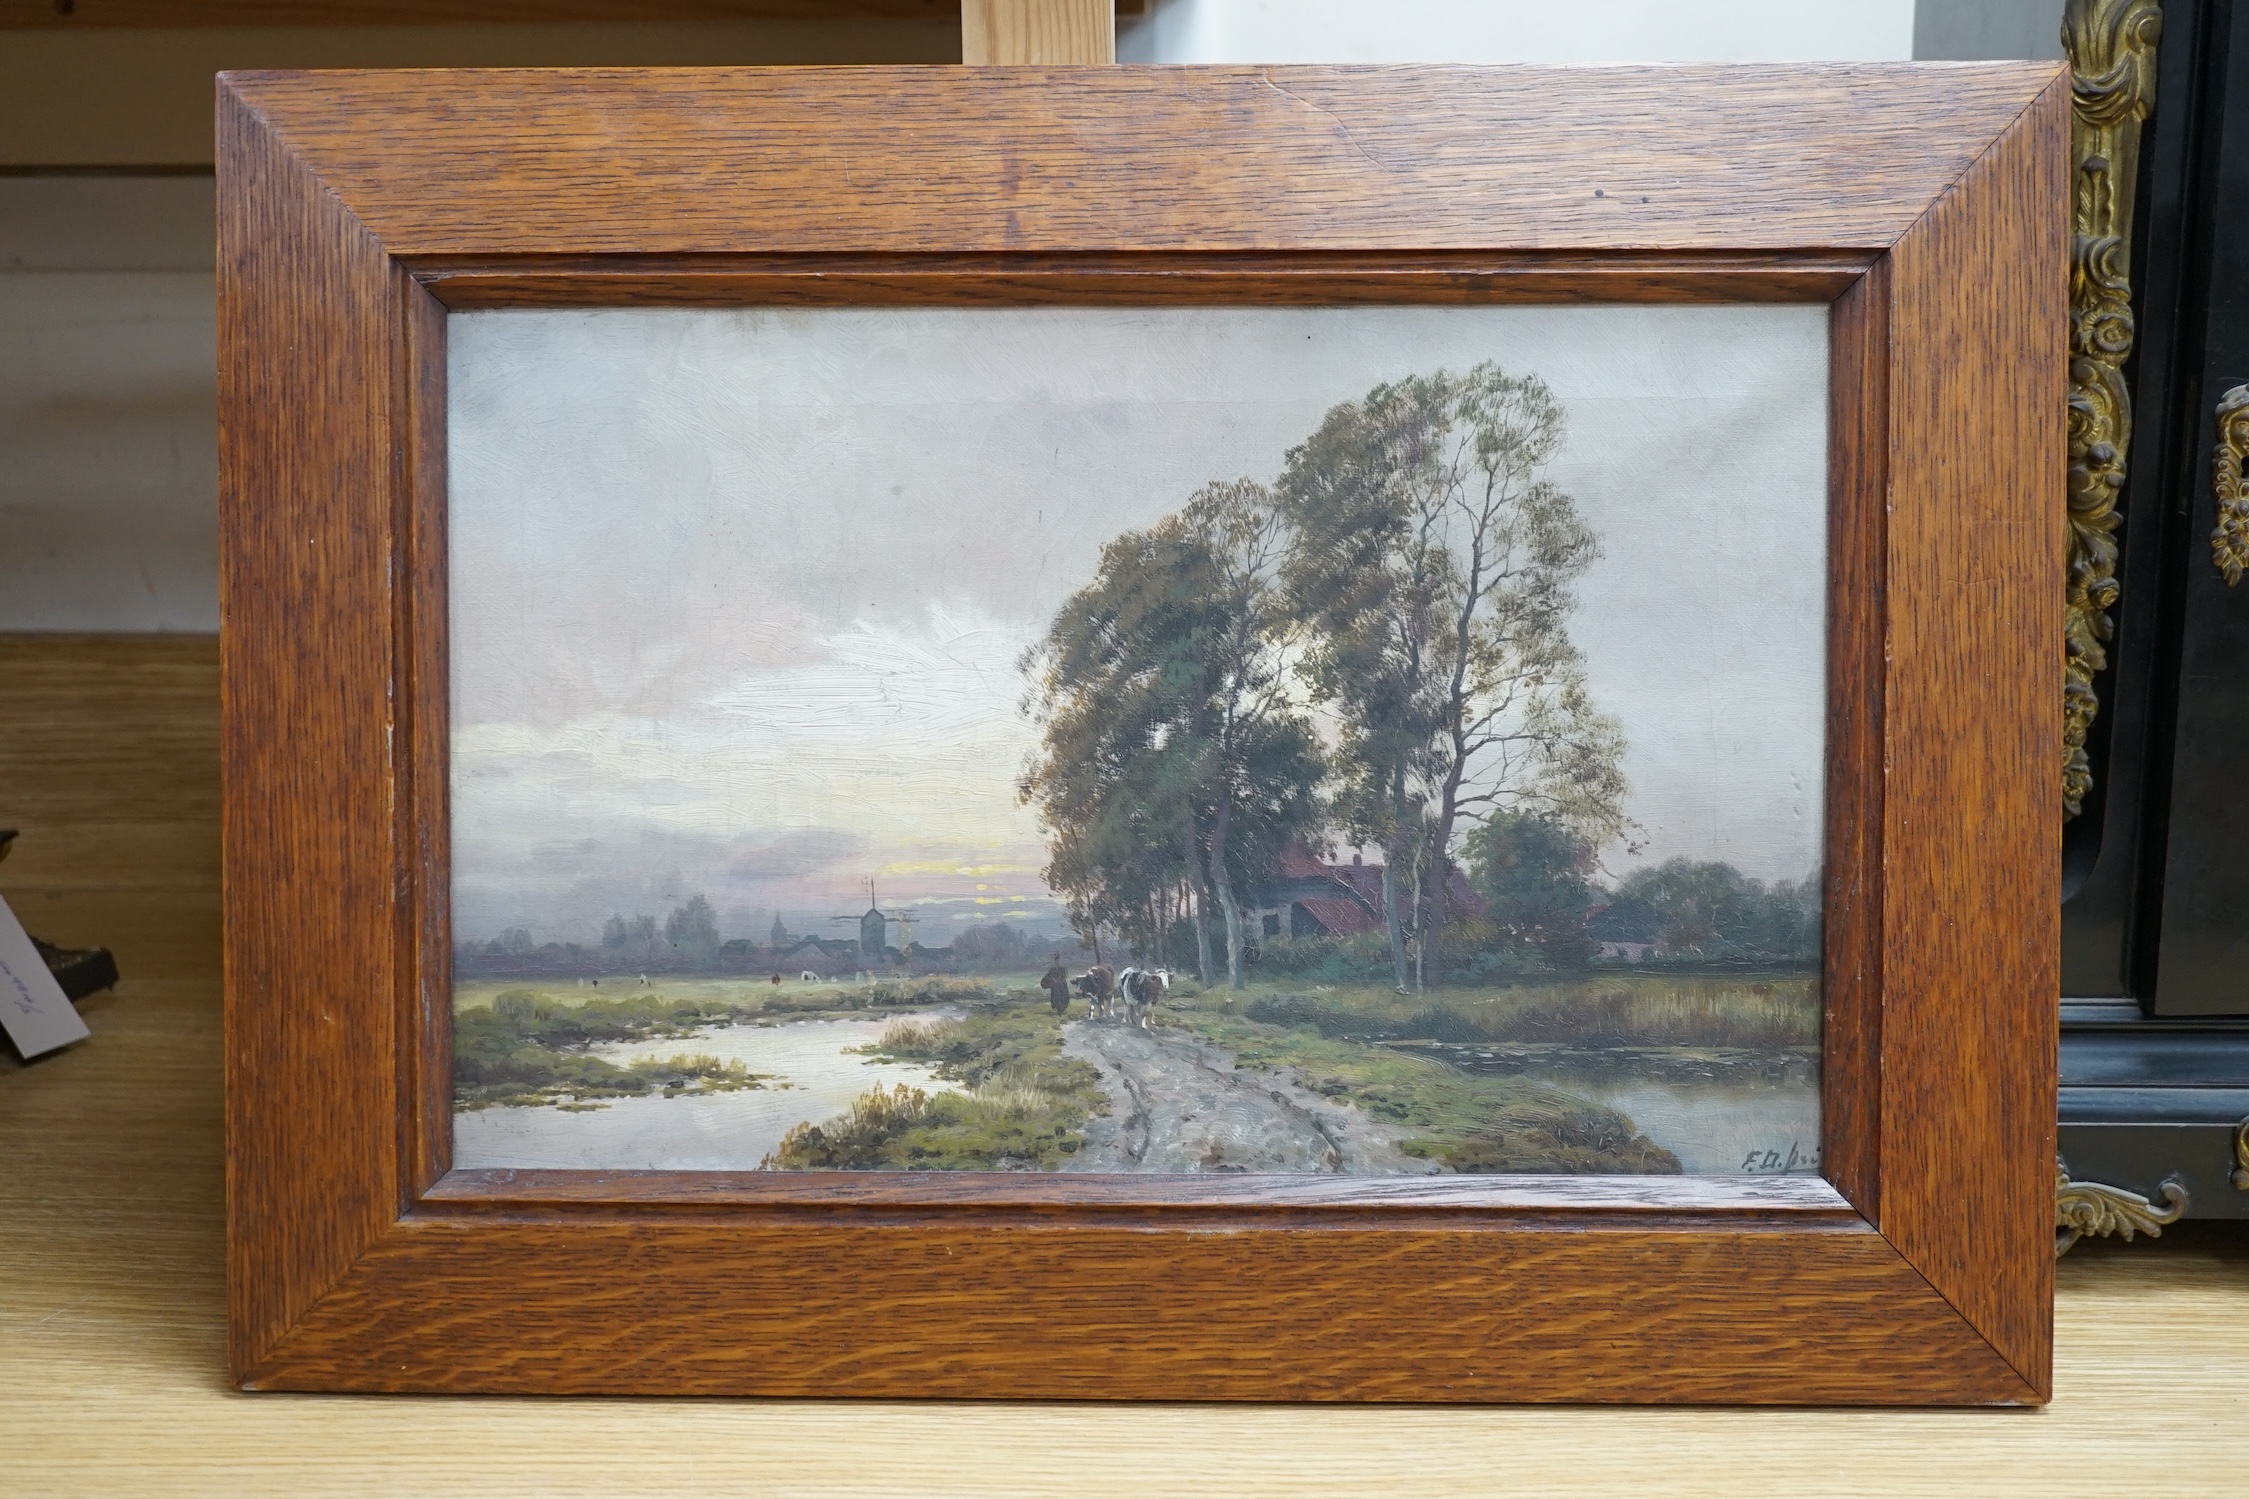 Ferdinand de Prins (Belgian, 1859-1908), oil on canvas, Wetlands with cattle, indistinctly signed lower right, A. Dechamps-Soiron label verso, 25 x 39cm. Condition - fair